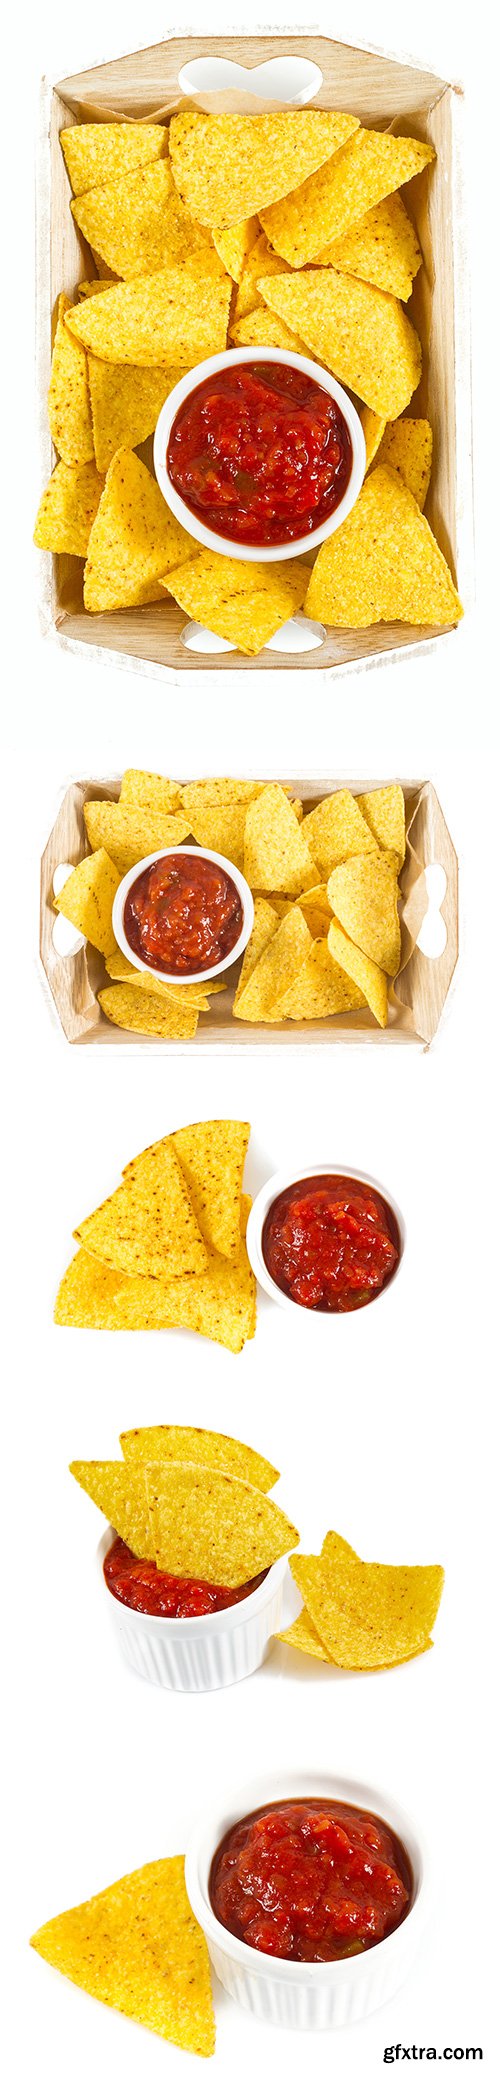 Nachos And Tomato Dip Isolated - 5xJPGs